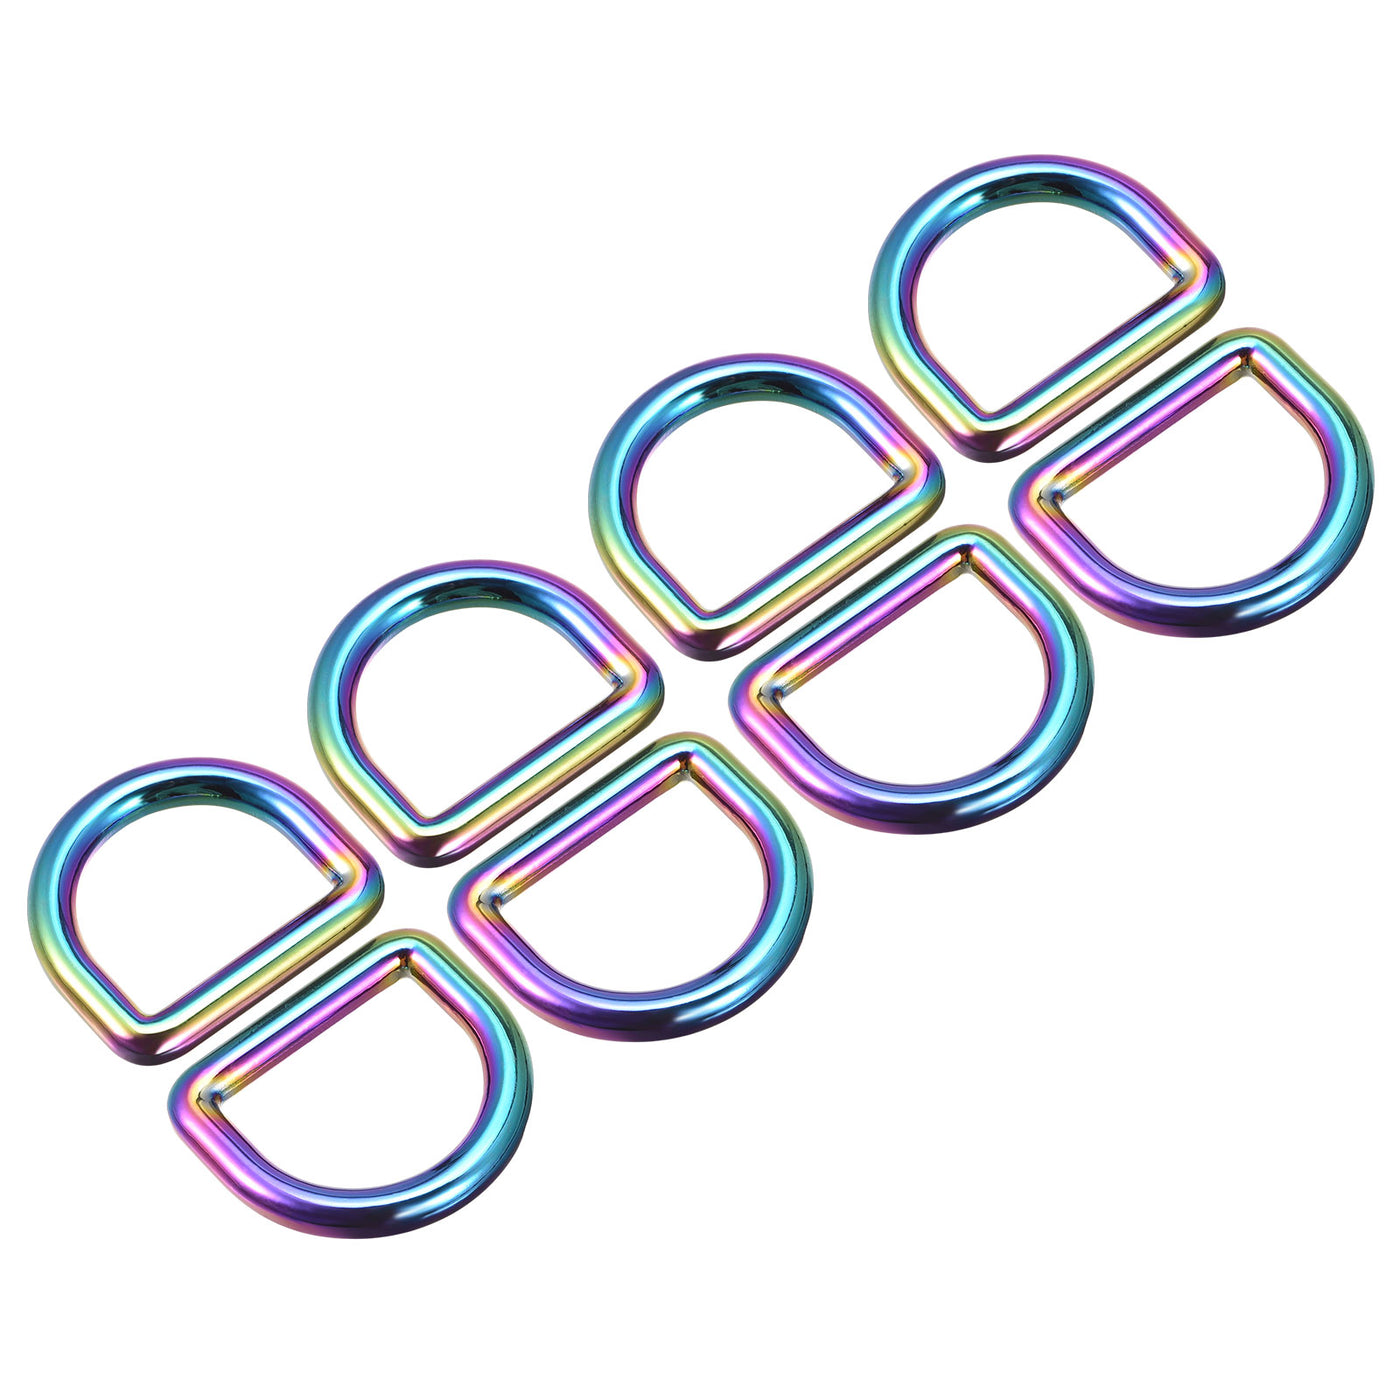 uxcell Uxcell Metal D Ring 0.98"(25mm) Zinc Alloy Buckle for Hardware Craft DIY Colorful 8pcs